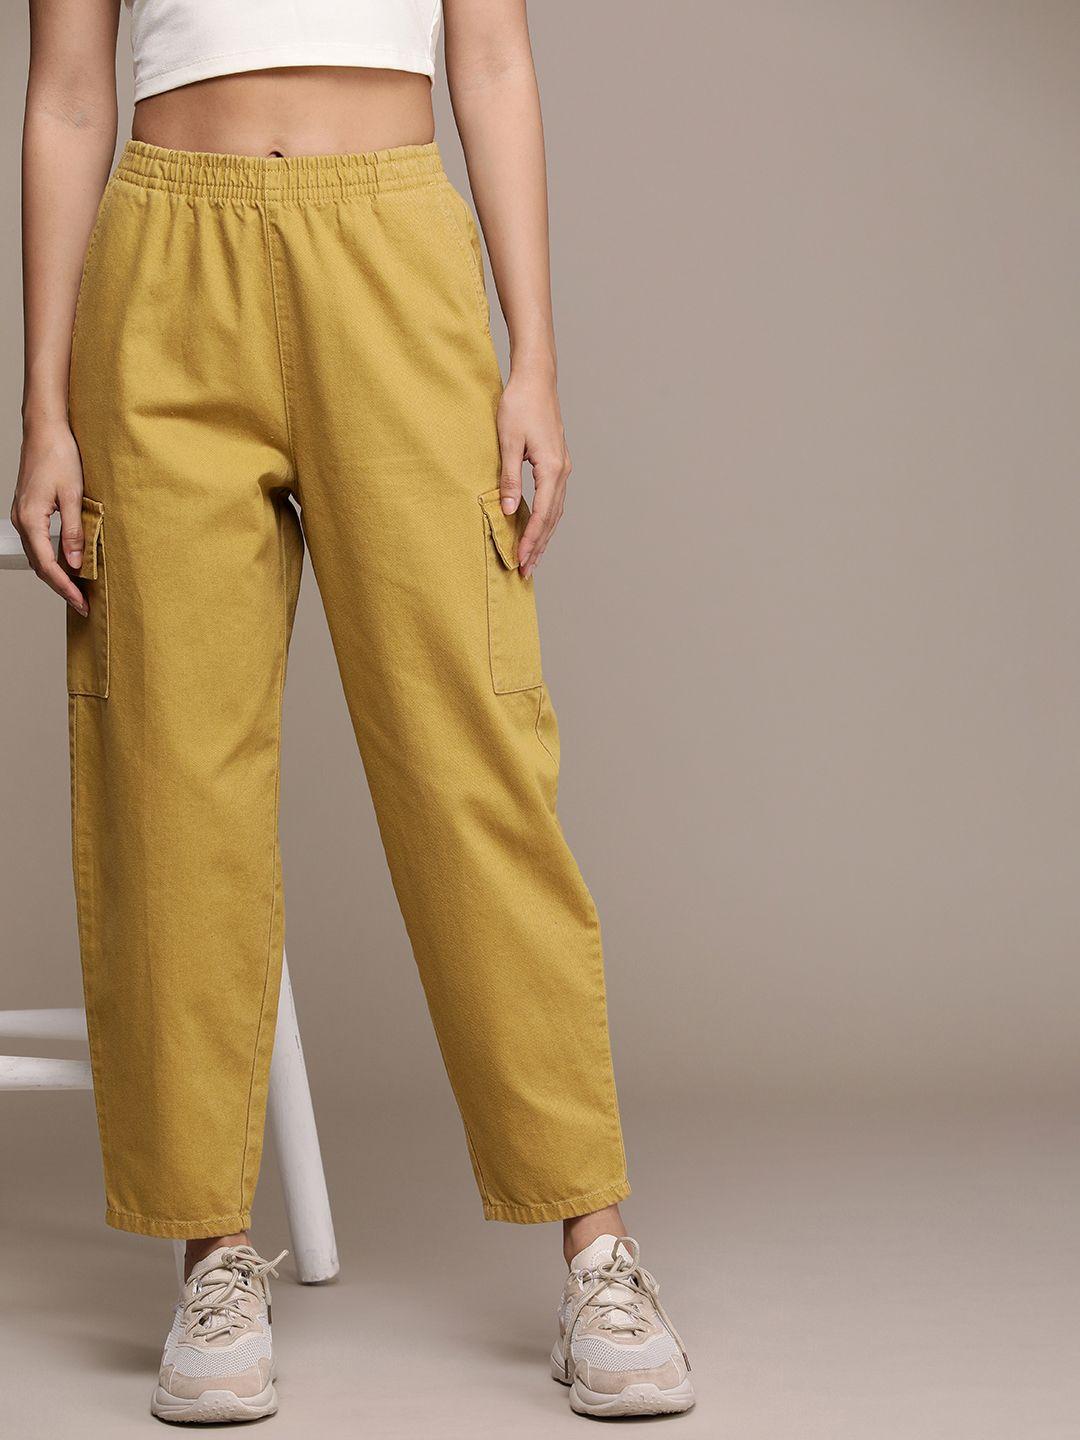 the-roadster-lifestyle-co.-women-pure-cotton-cargos-trousers